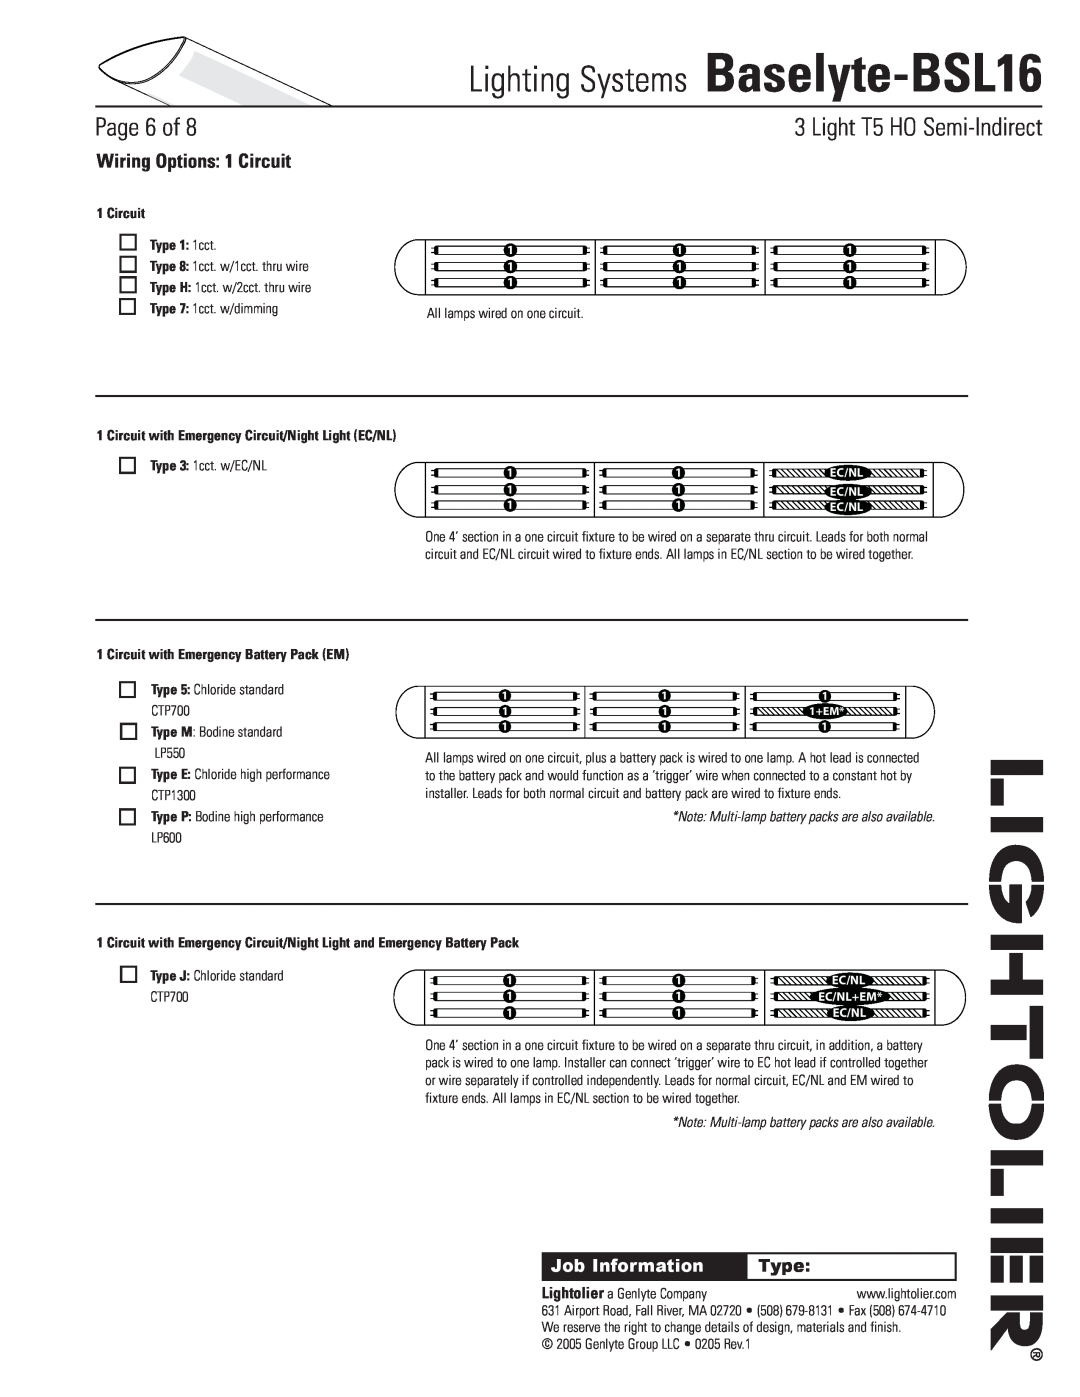 Lightolier Baselyte-BSL16 Wiring Options 1 Circuit, Circuit Type 1 1cct, Circuit with Emergency Battery Pack EM, Page of 